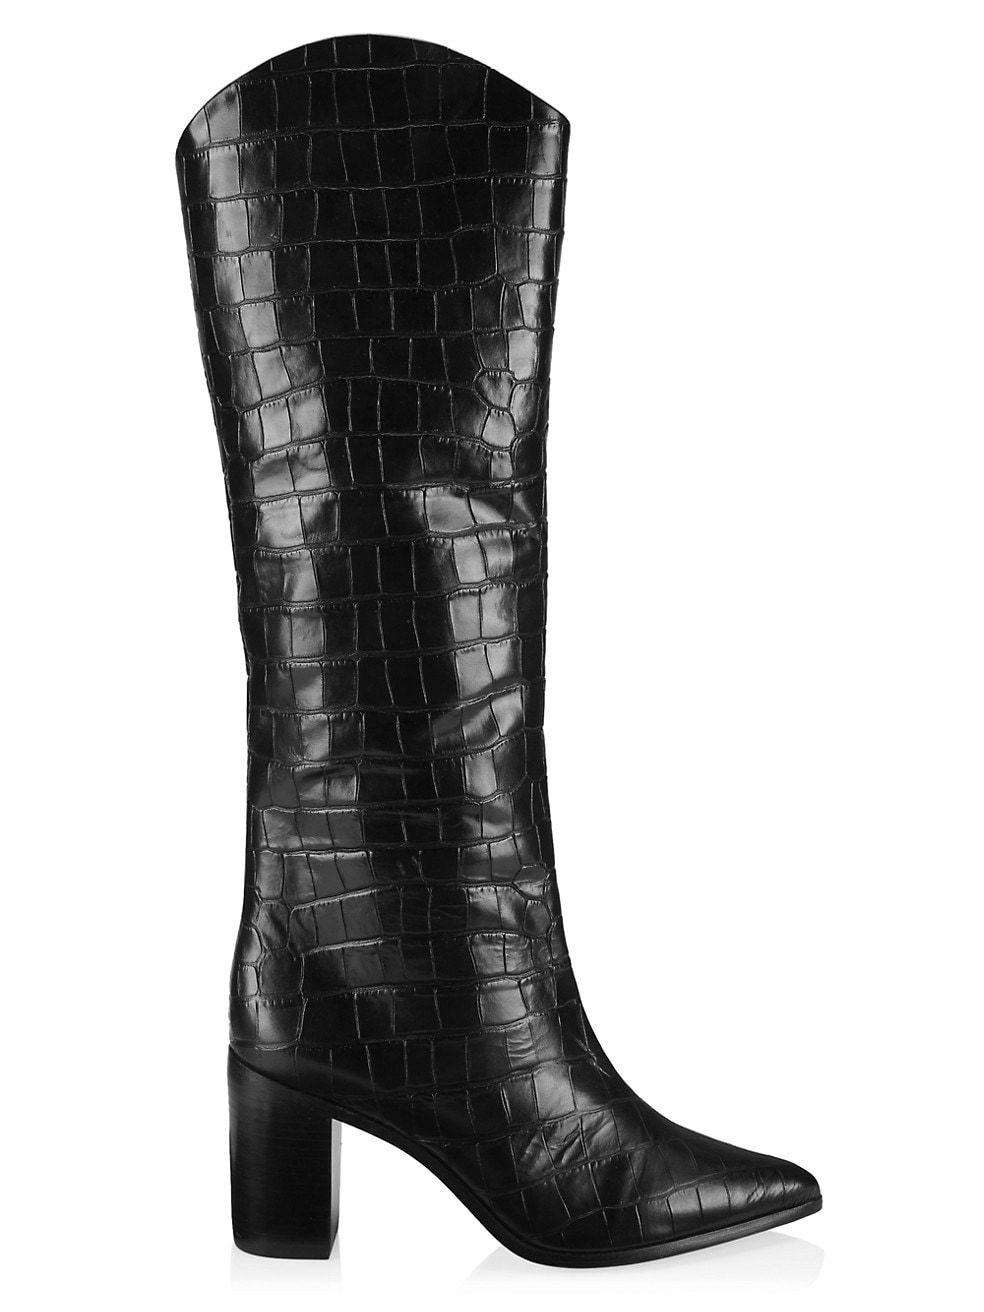 Schutz


Analeah Lizard-Embossed Leather Boots



4.2 out of 5 Customer Rating | Saks Fifth Avenue